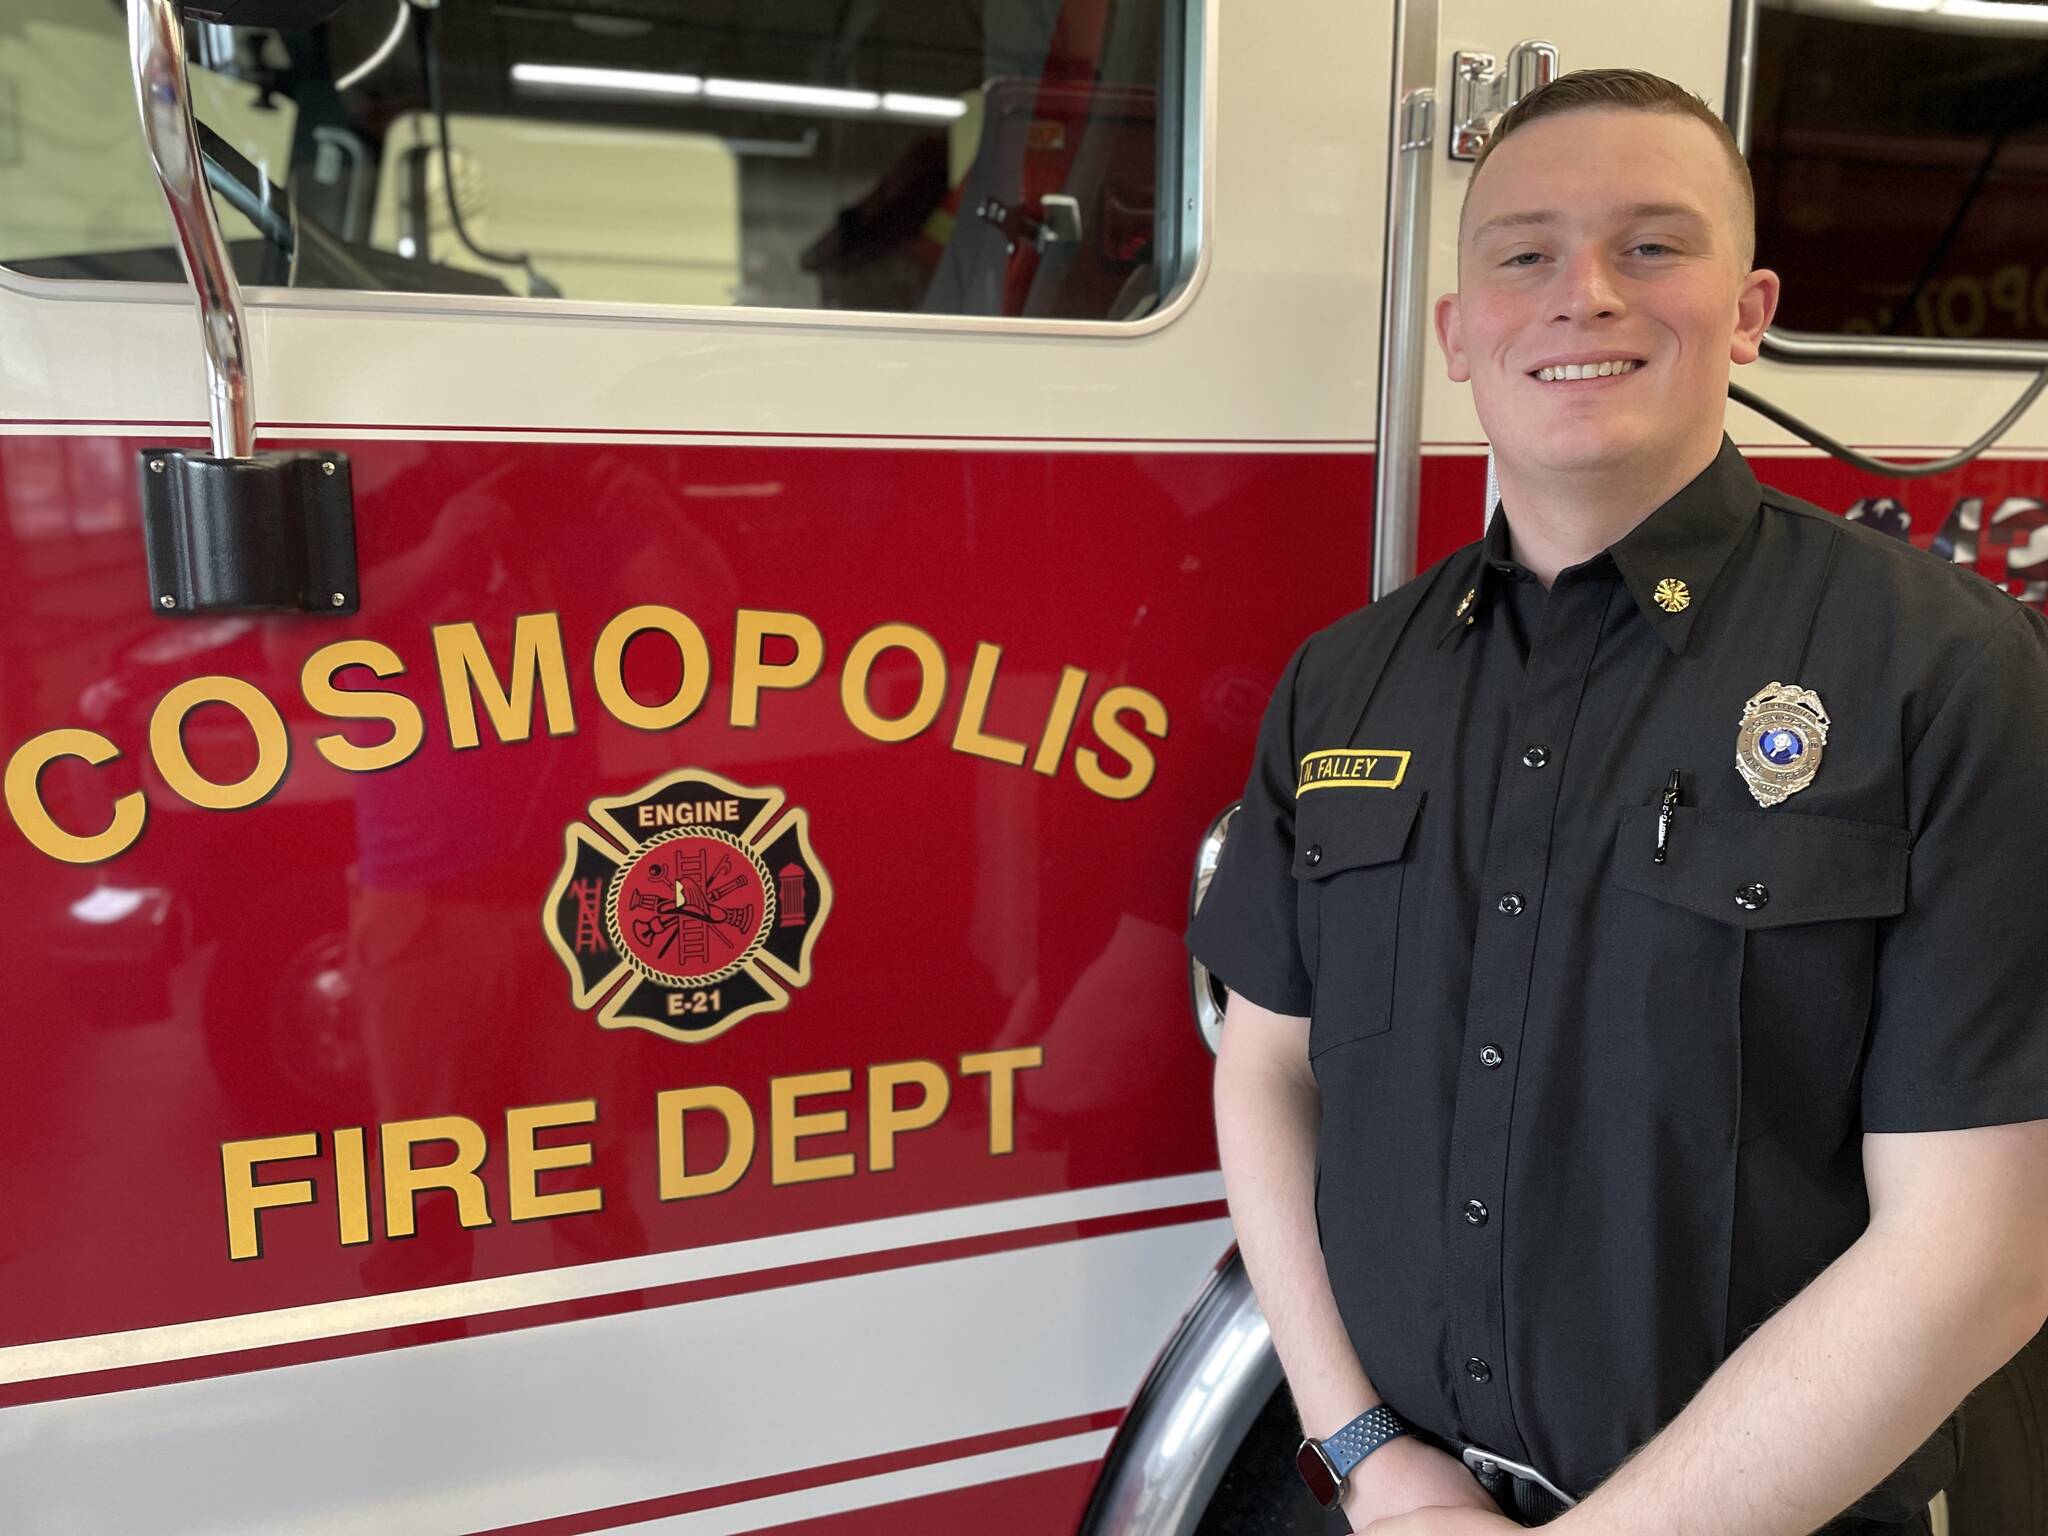 Nick Falley, appointed in January as fire chief of the Cosmopolis Fire Department, has the task of leading the all-volunteer department. (Michael S. Lockett / The Daily World)